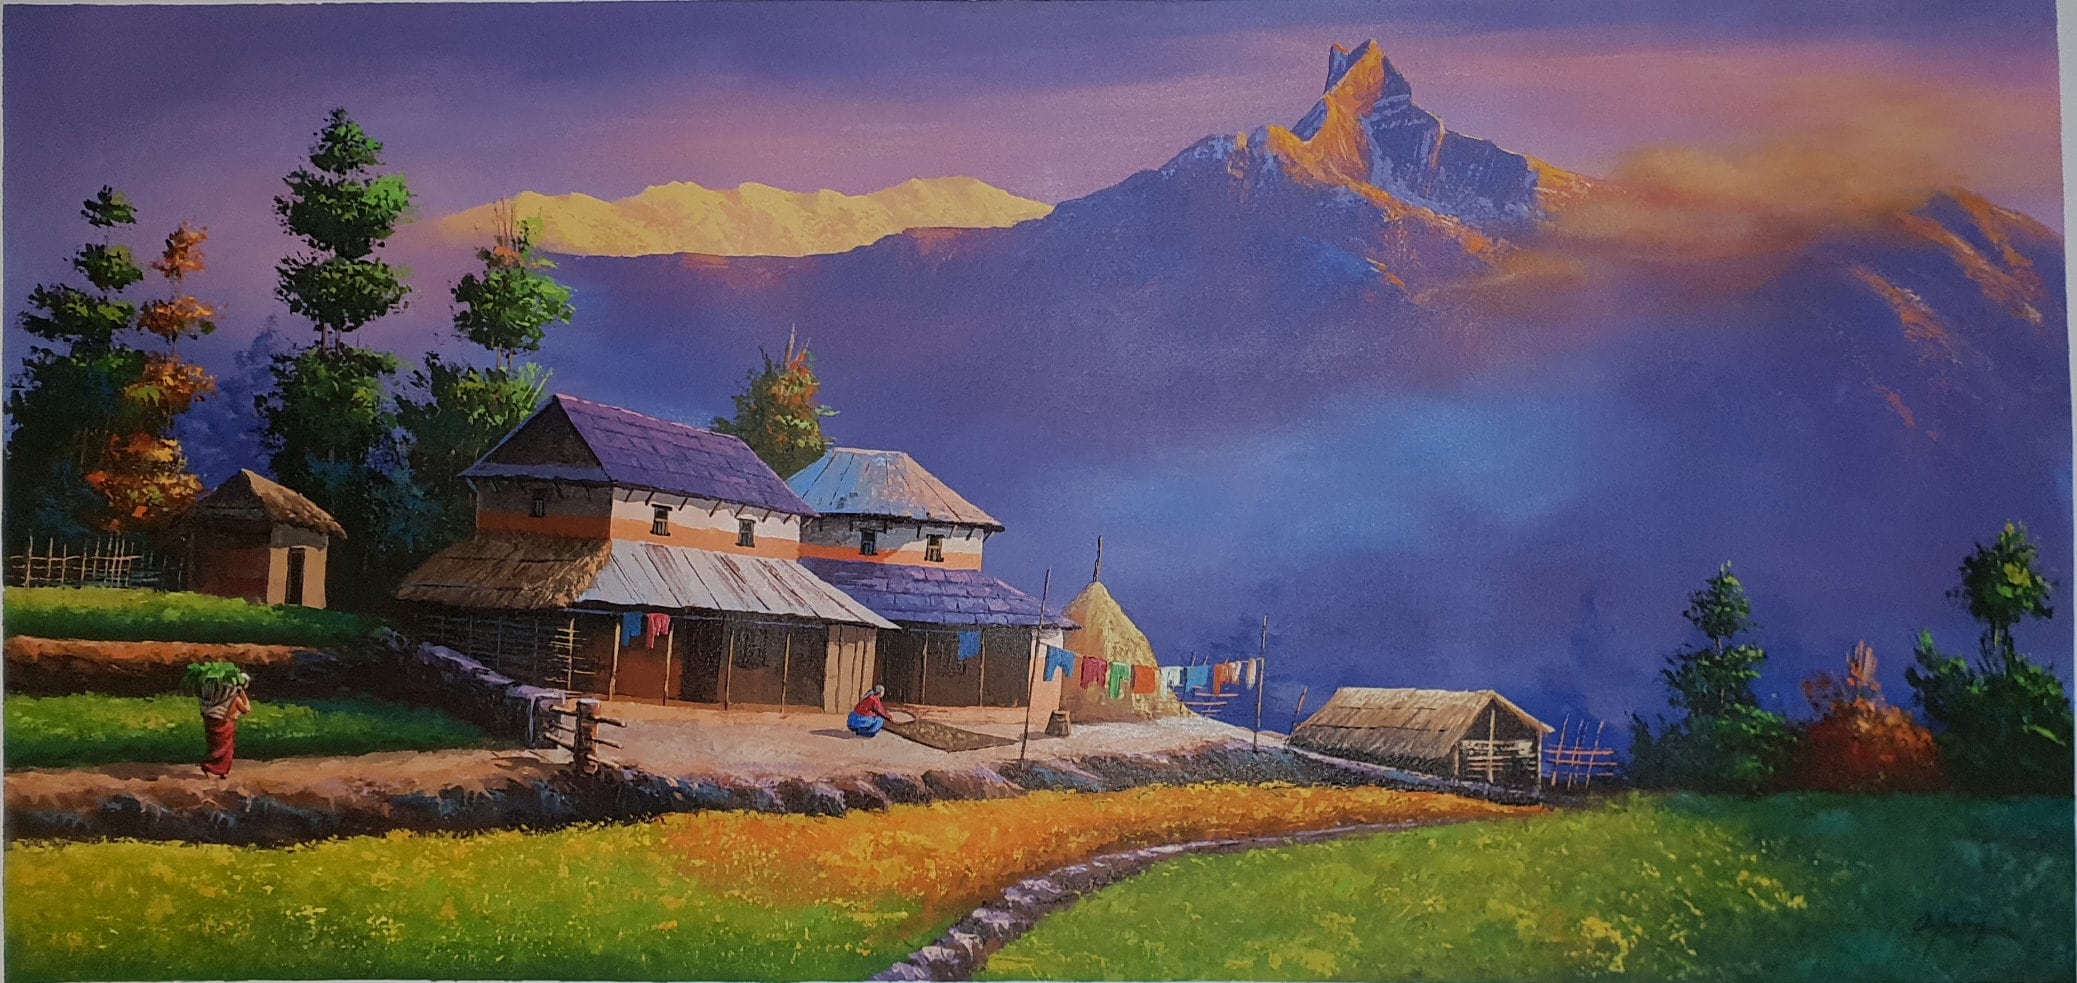 Fishtail with Village Life-Nepal Landscape Painting